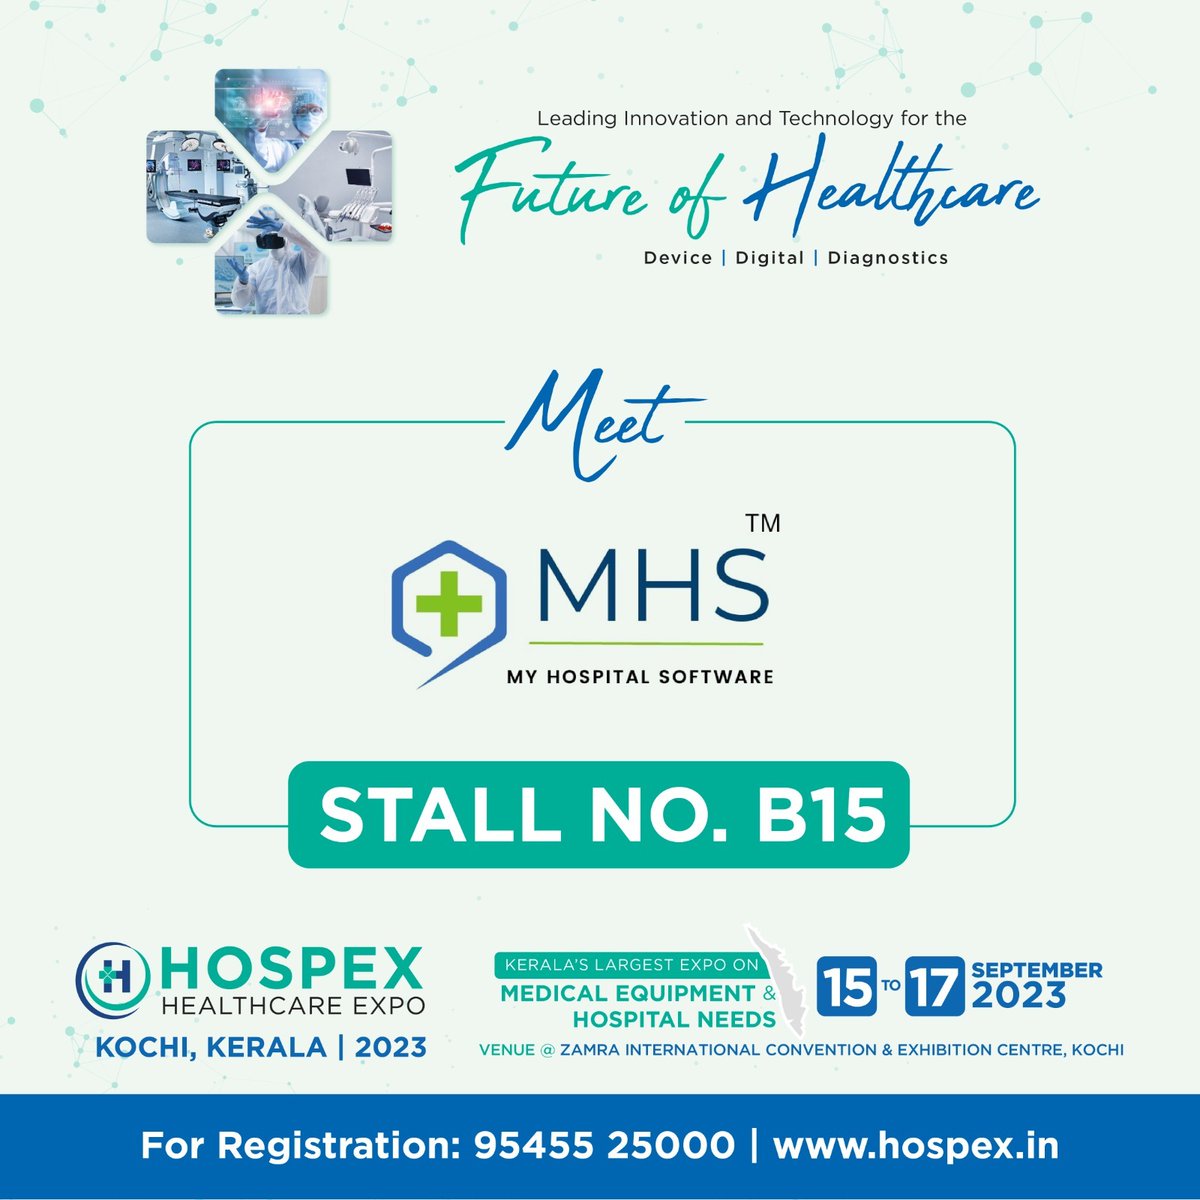 Exciting news! My Hospital Software (MHS) will be at Hospex Healthcare Expo in Kochi, Kerala, from Sept 15-17, 2023. Visit our stall B15 at Zamra Convention Centre for healthcare innovations. Stay tuned for updates! See you there! 

#MHSExpoKochi #Hospex2023 #HealthcareExhibition